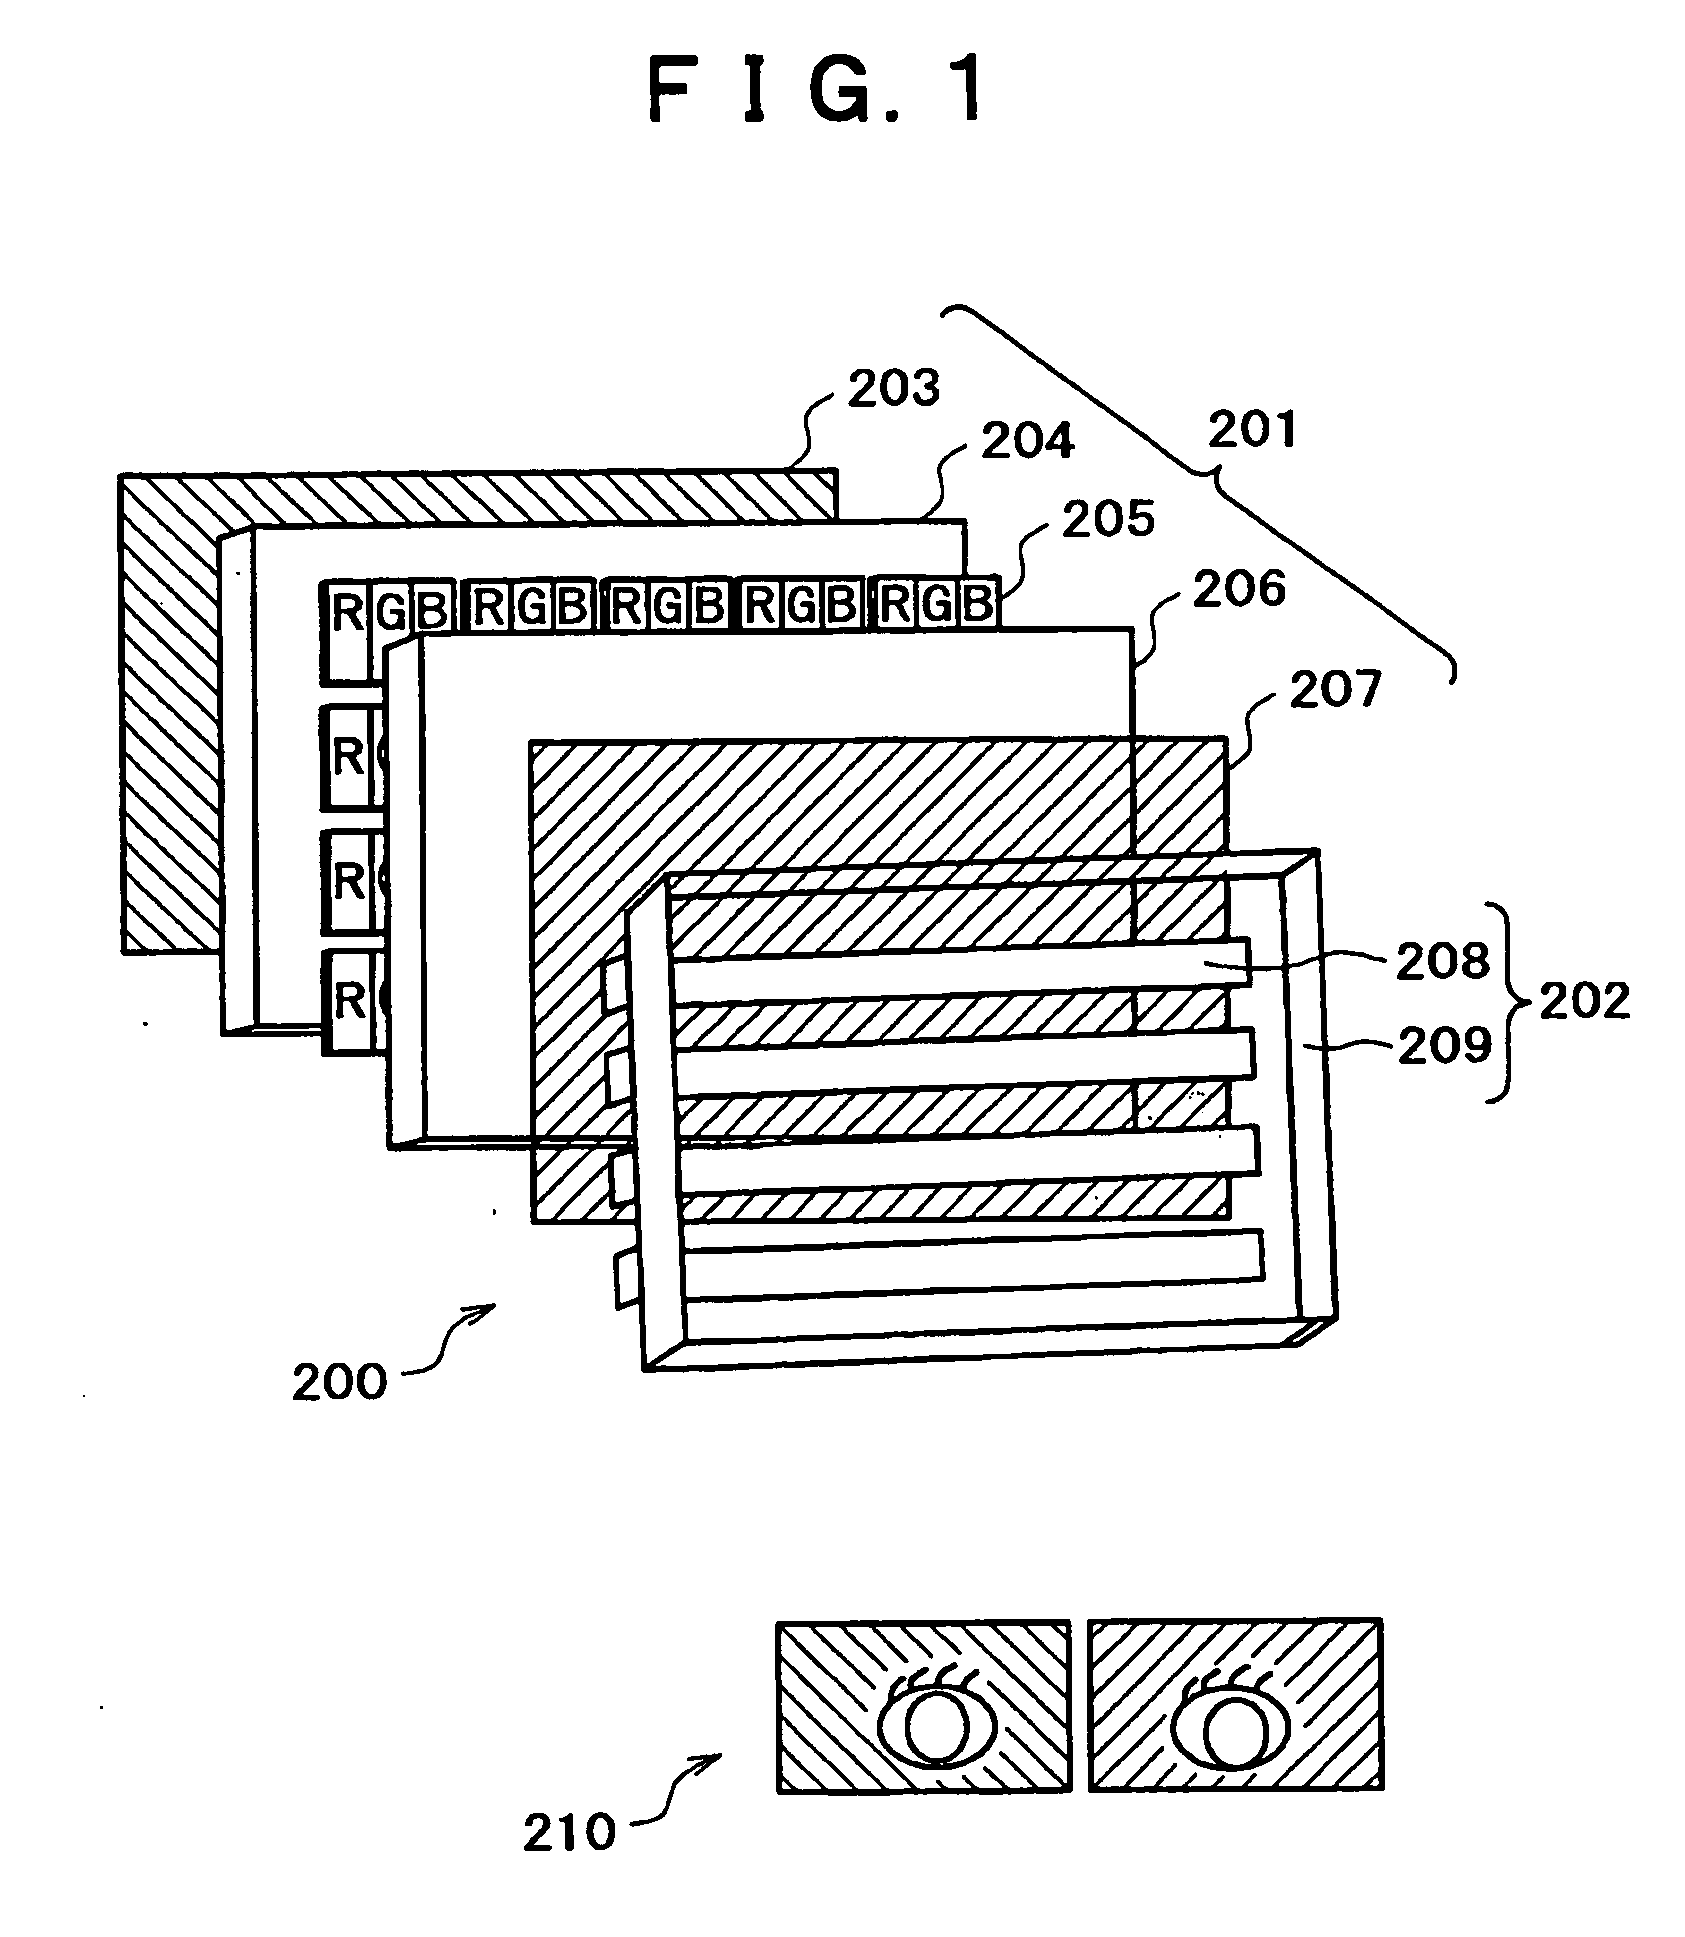 Stereoscopic image display apparatus, display apparatus, divided wave plate filter, plate-shaped filter, and filter position adjusting mechanism attached to the display apparatus, aligning apparatus, filter position adjusting method, and filter aligning method